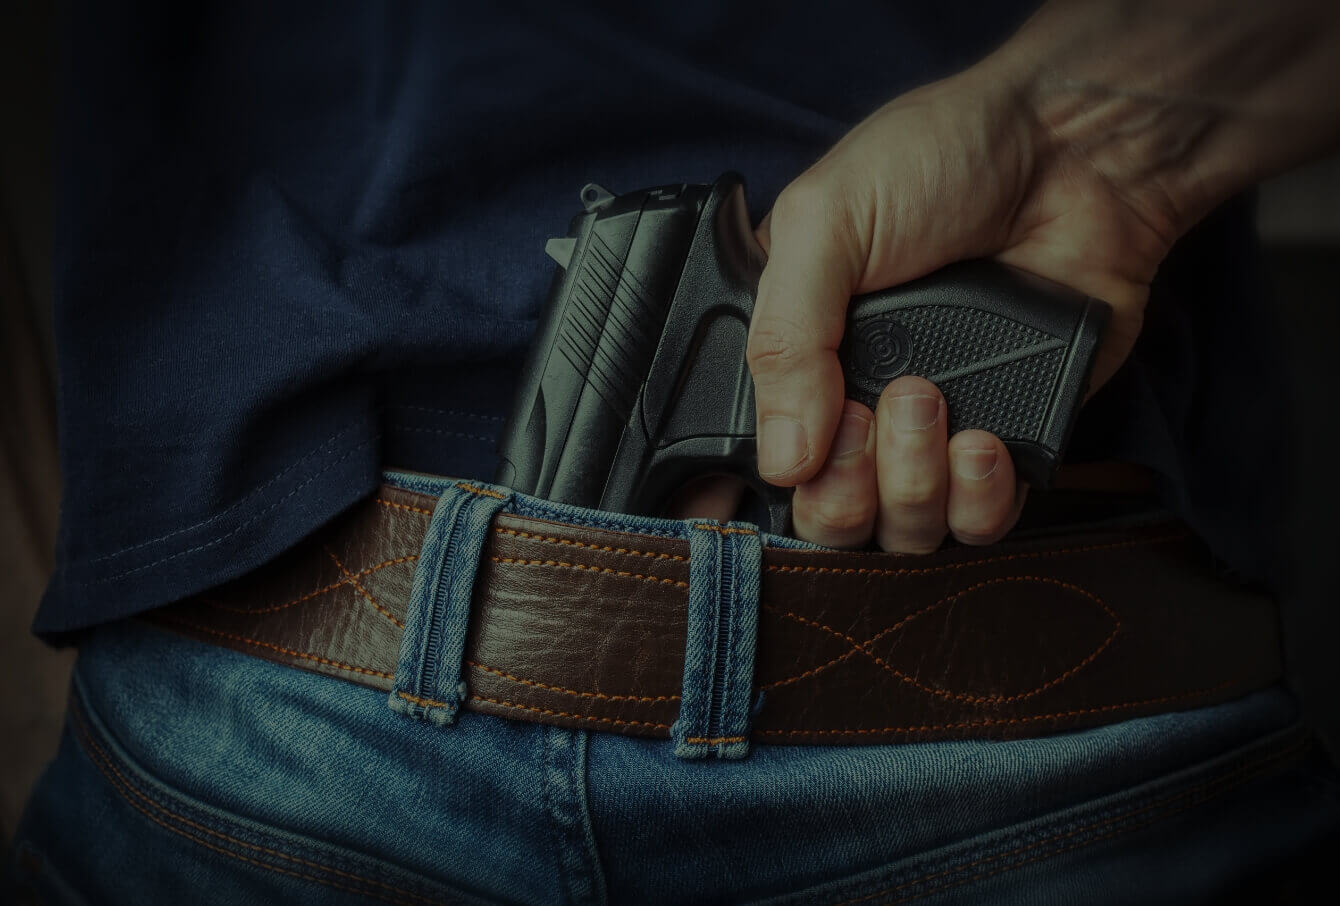 CONCEALED CARRY CLASSES